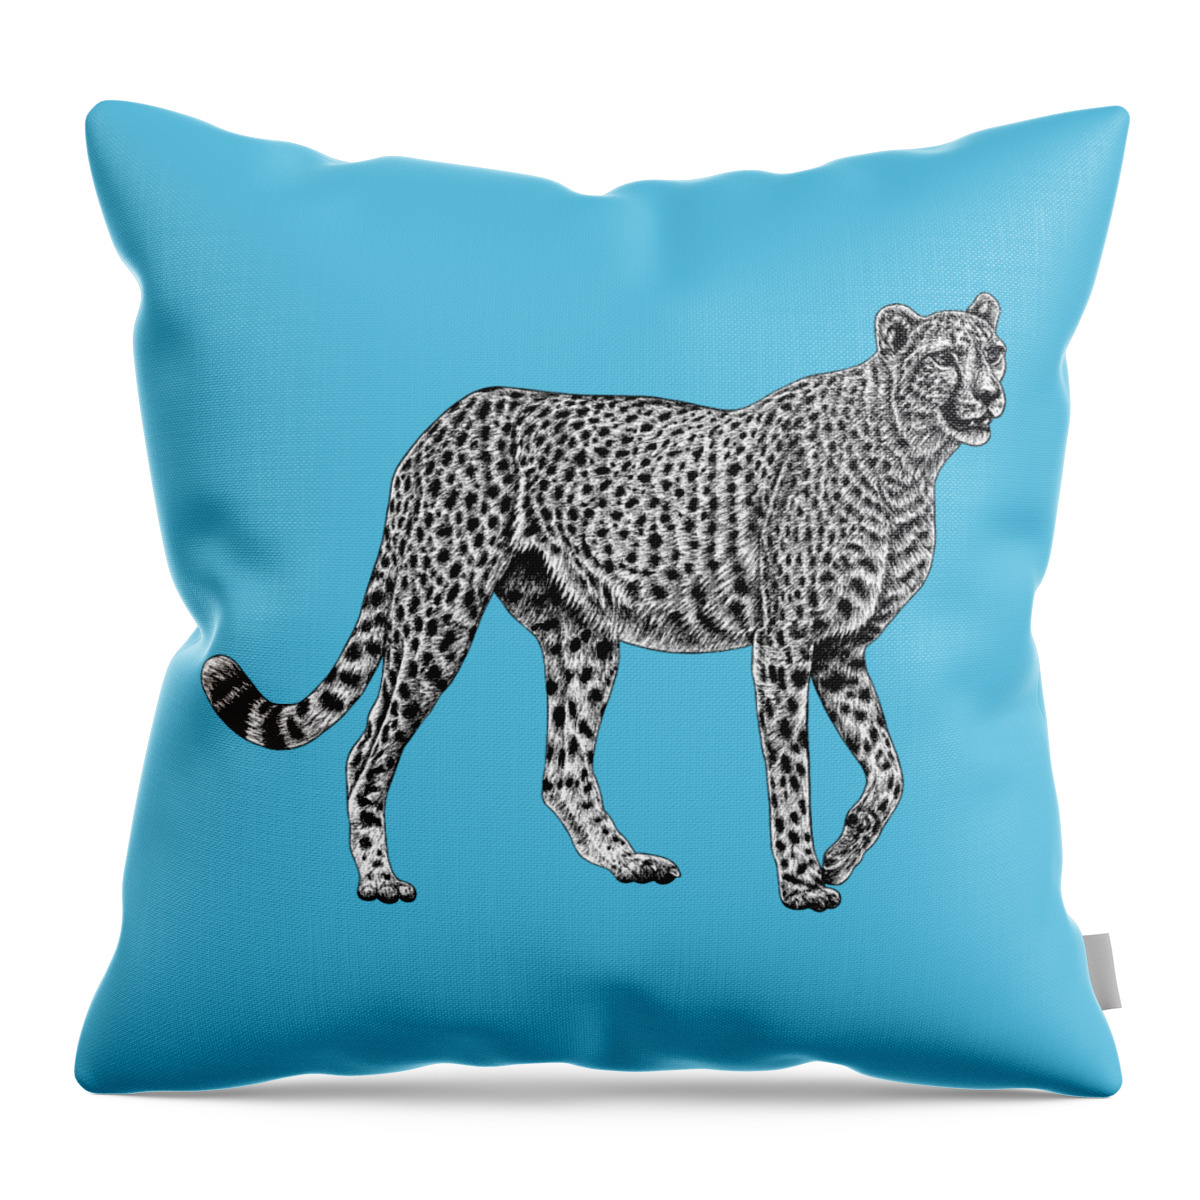 Chetah Throw Pillow featuring the drawing African cheetah big cat ink illustration by Loren Dowding